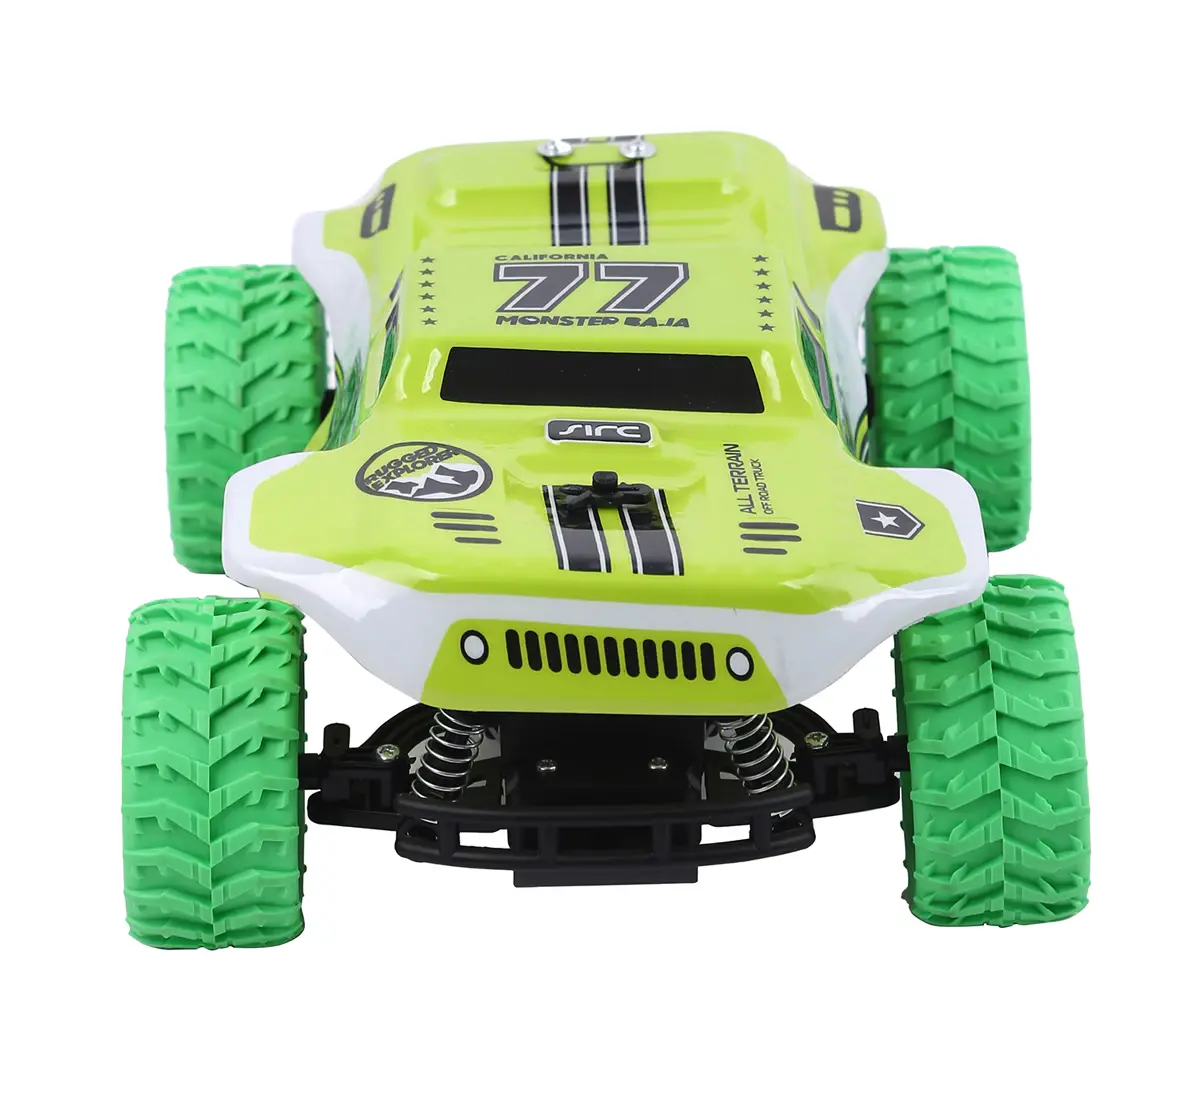 Monster Baja Truck Remote Controlled Car by Sharper Image, For Kids 6 Years and Above, Red